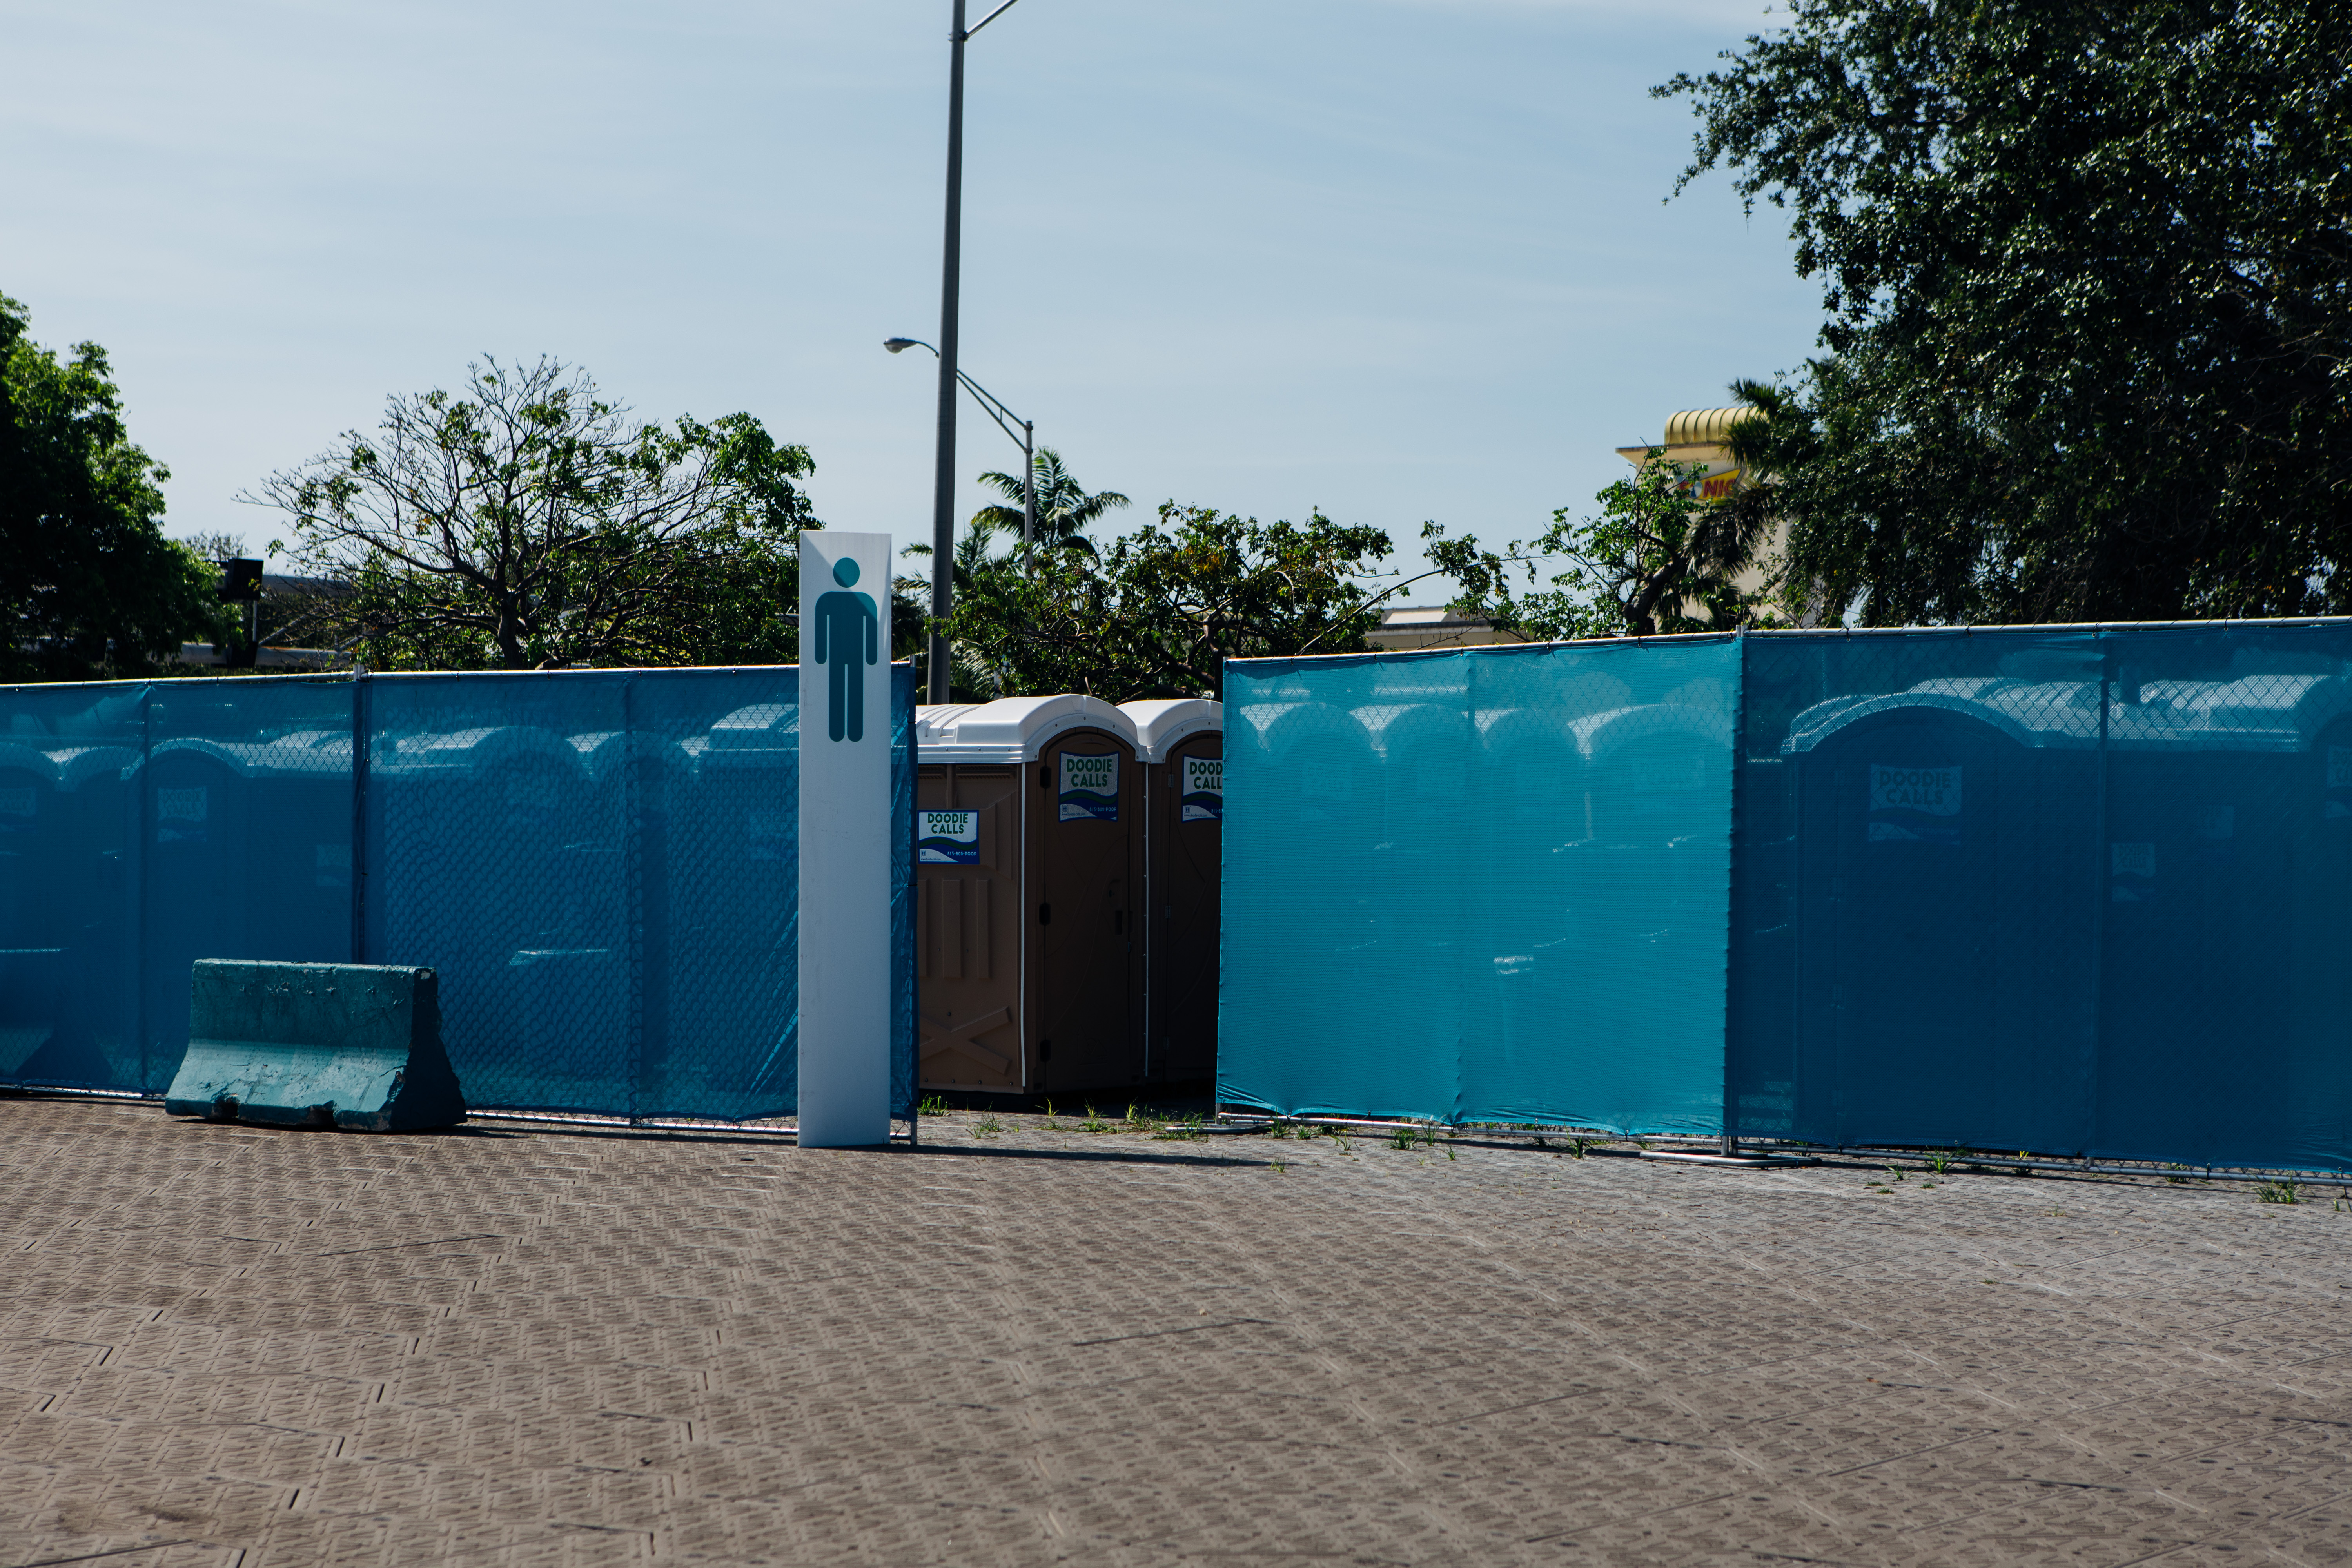 Porta Potty Rentals In Miami: Affordable Solutions